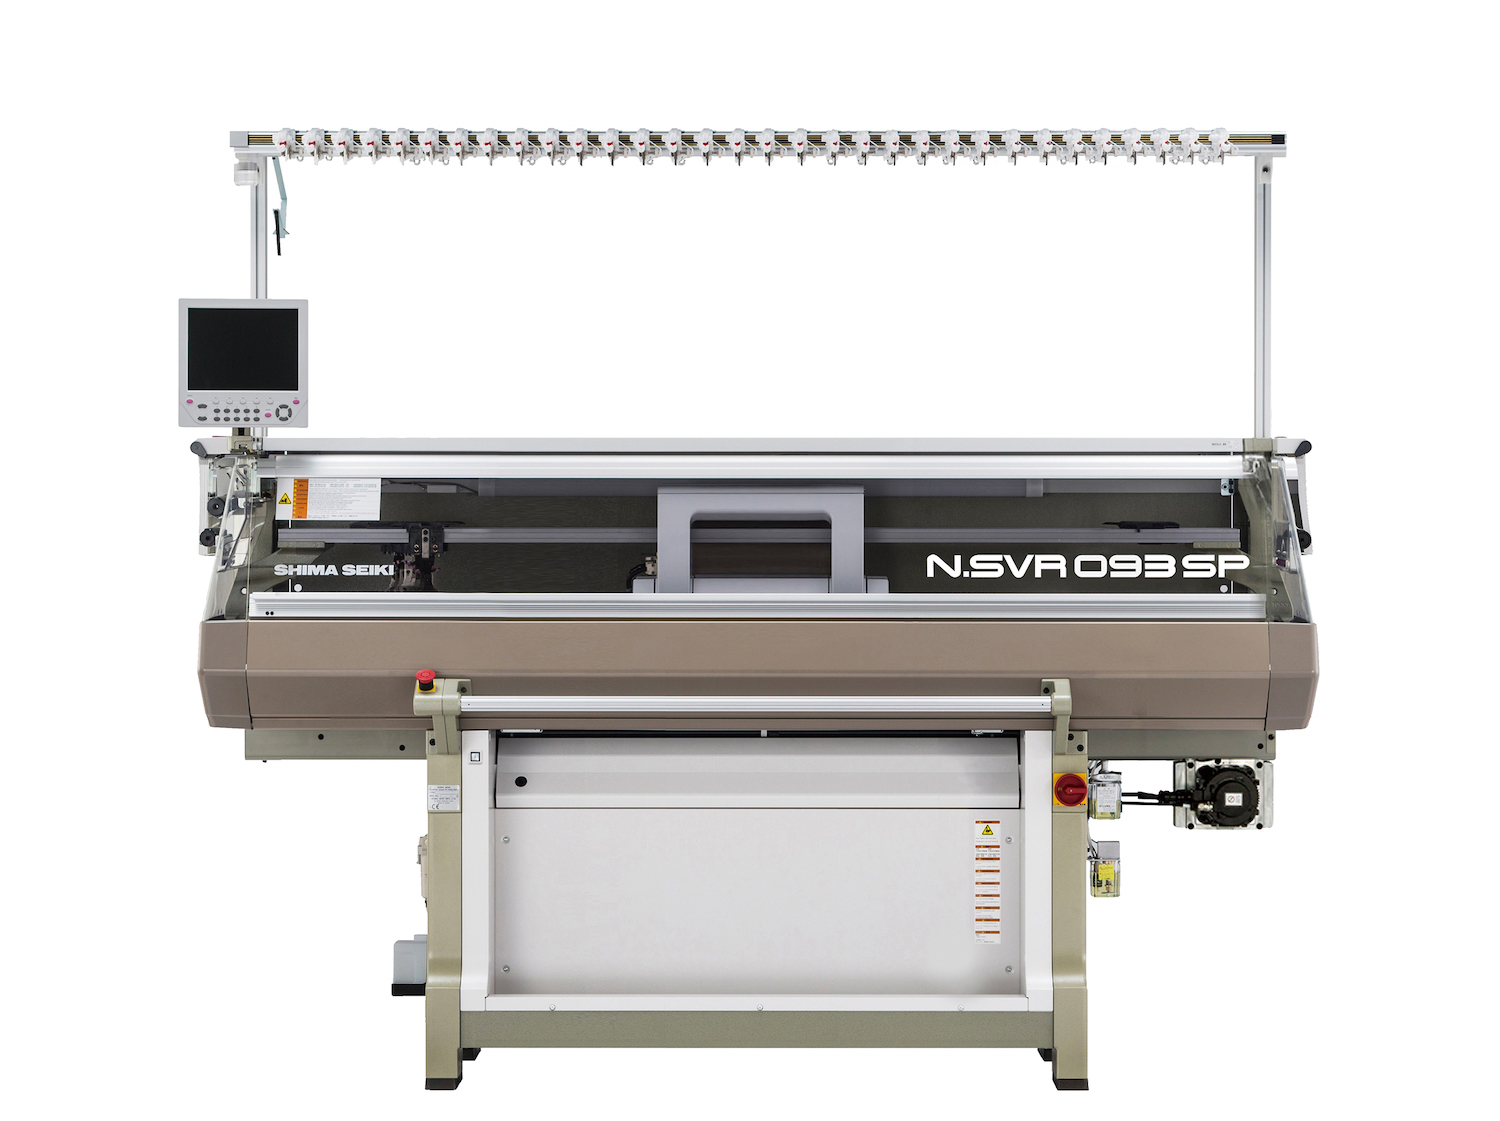 N.SVR093SP is a conventional shaping machine with inlay capability. © Shima Seiki